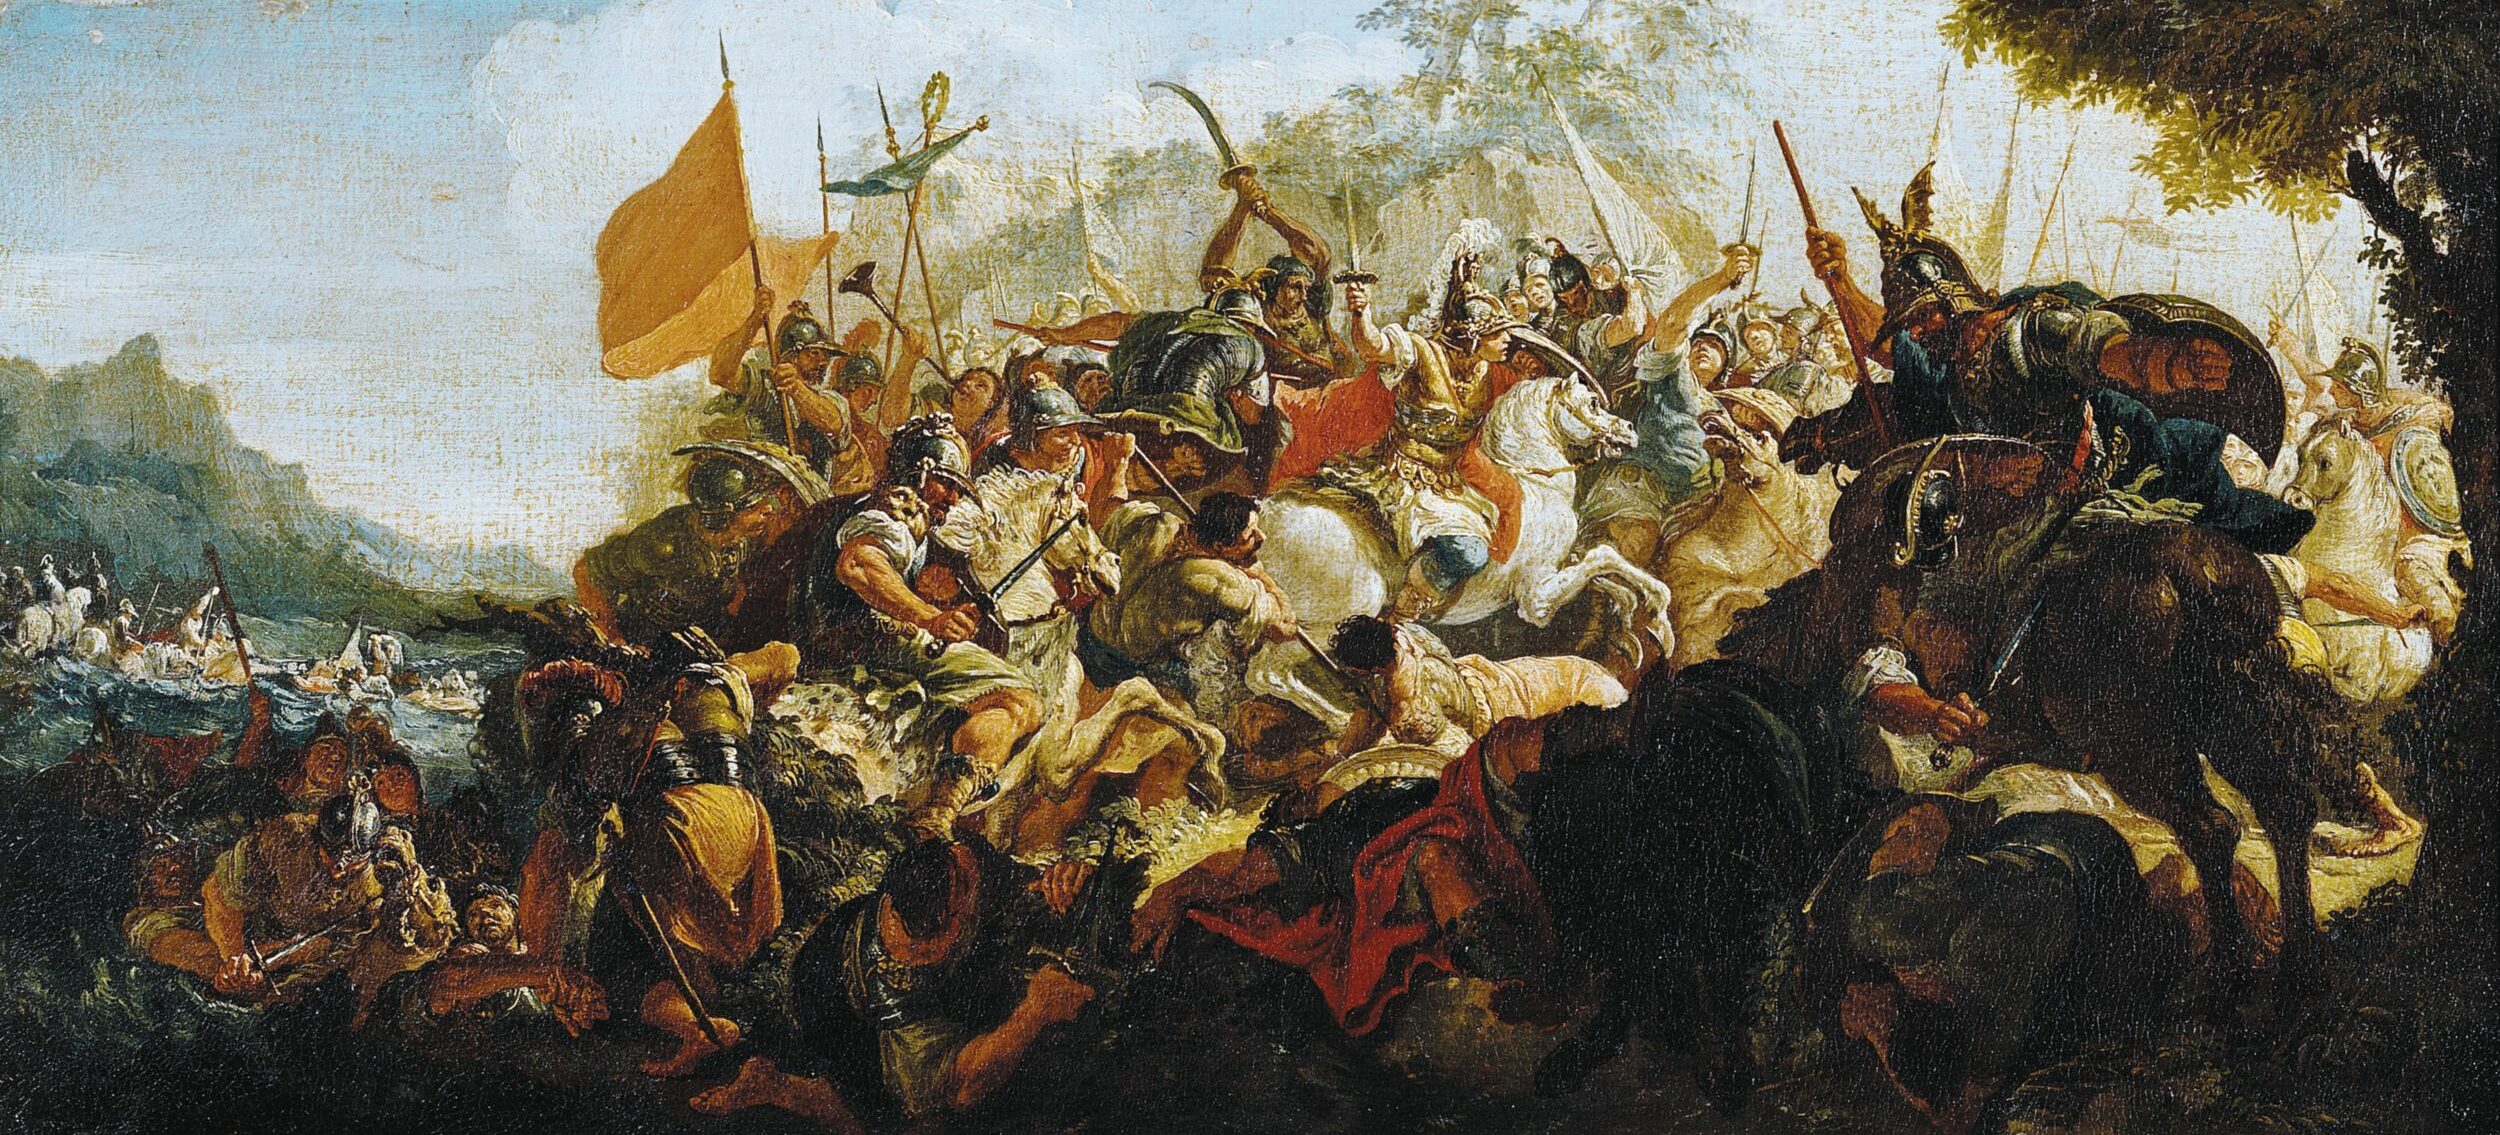 Alexander’s army of 35,000 dealt the Persians a crushing blow at the Battle of Granicus in 334 bc. The Persians lost 15,000 men to a mere 100 Greeks.